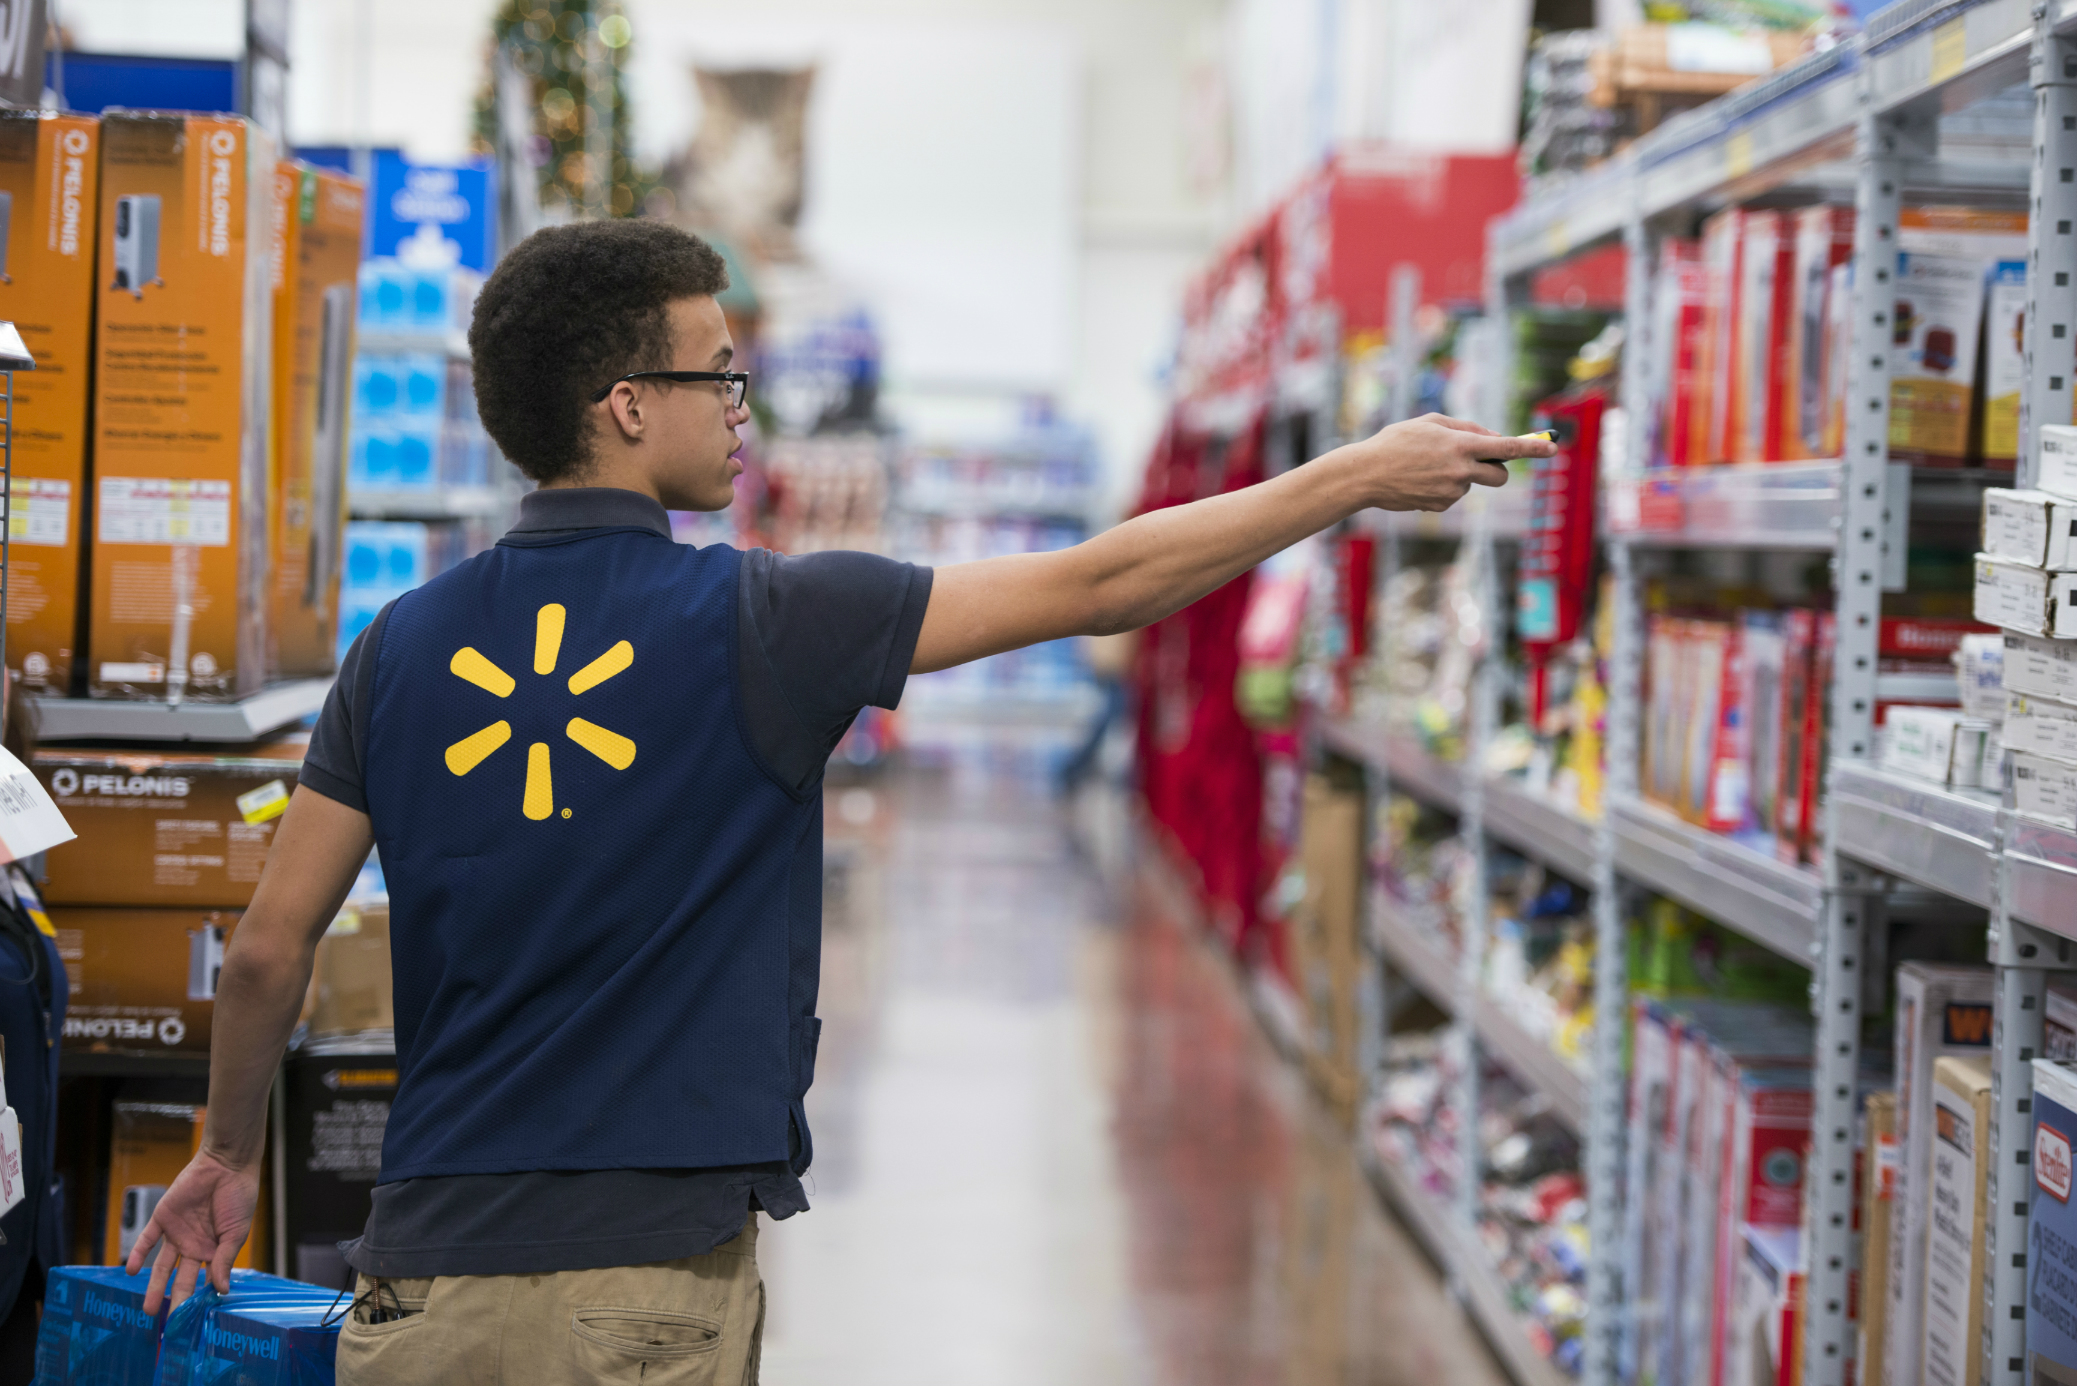 Walmart Wants its Suppliers to Apply Blockchain Technology